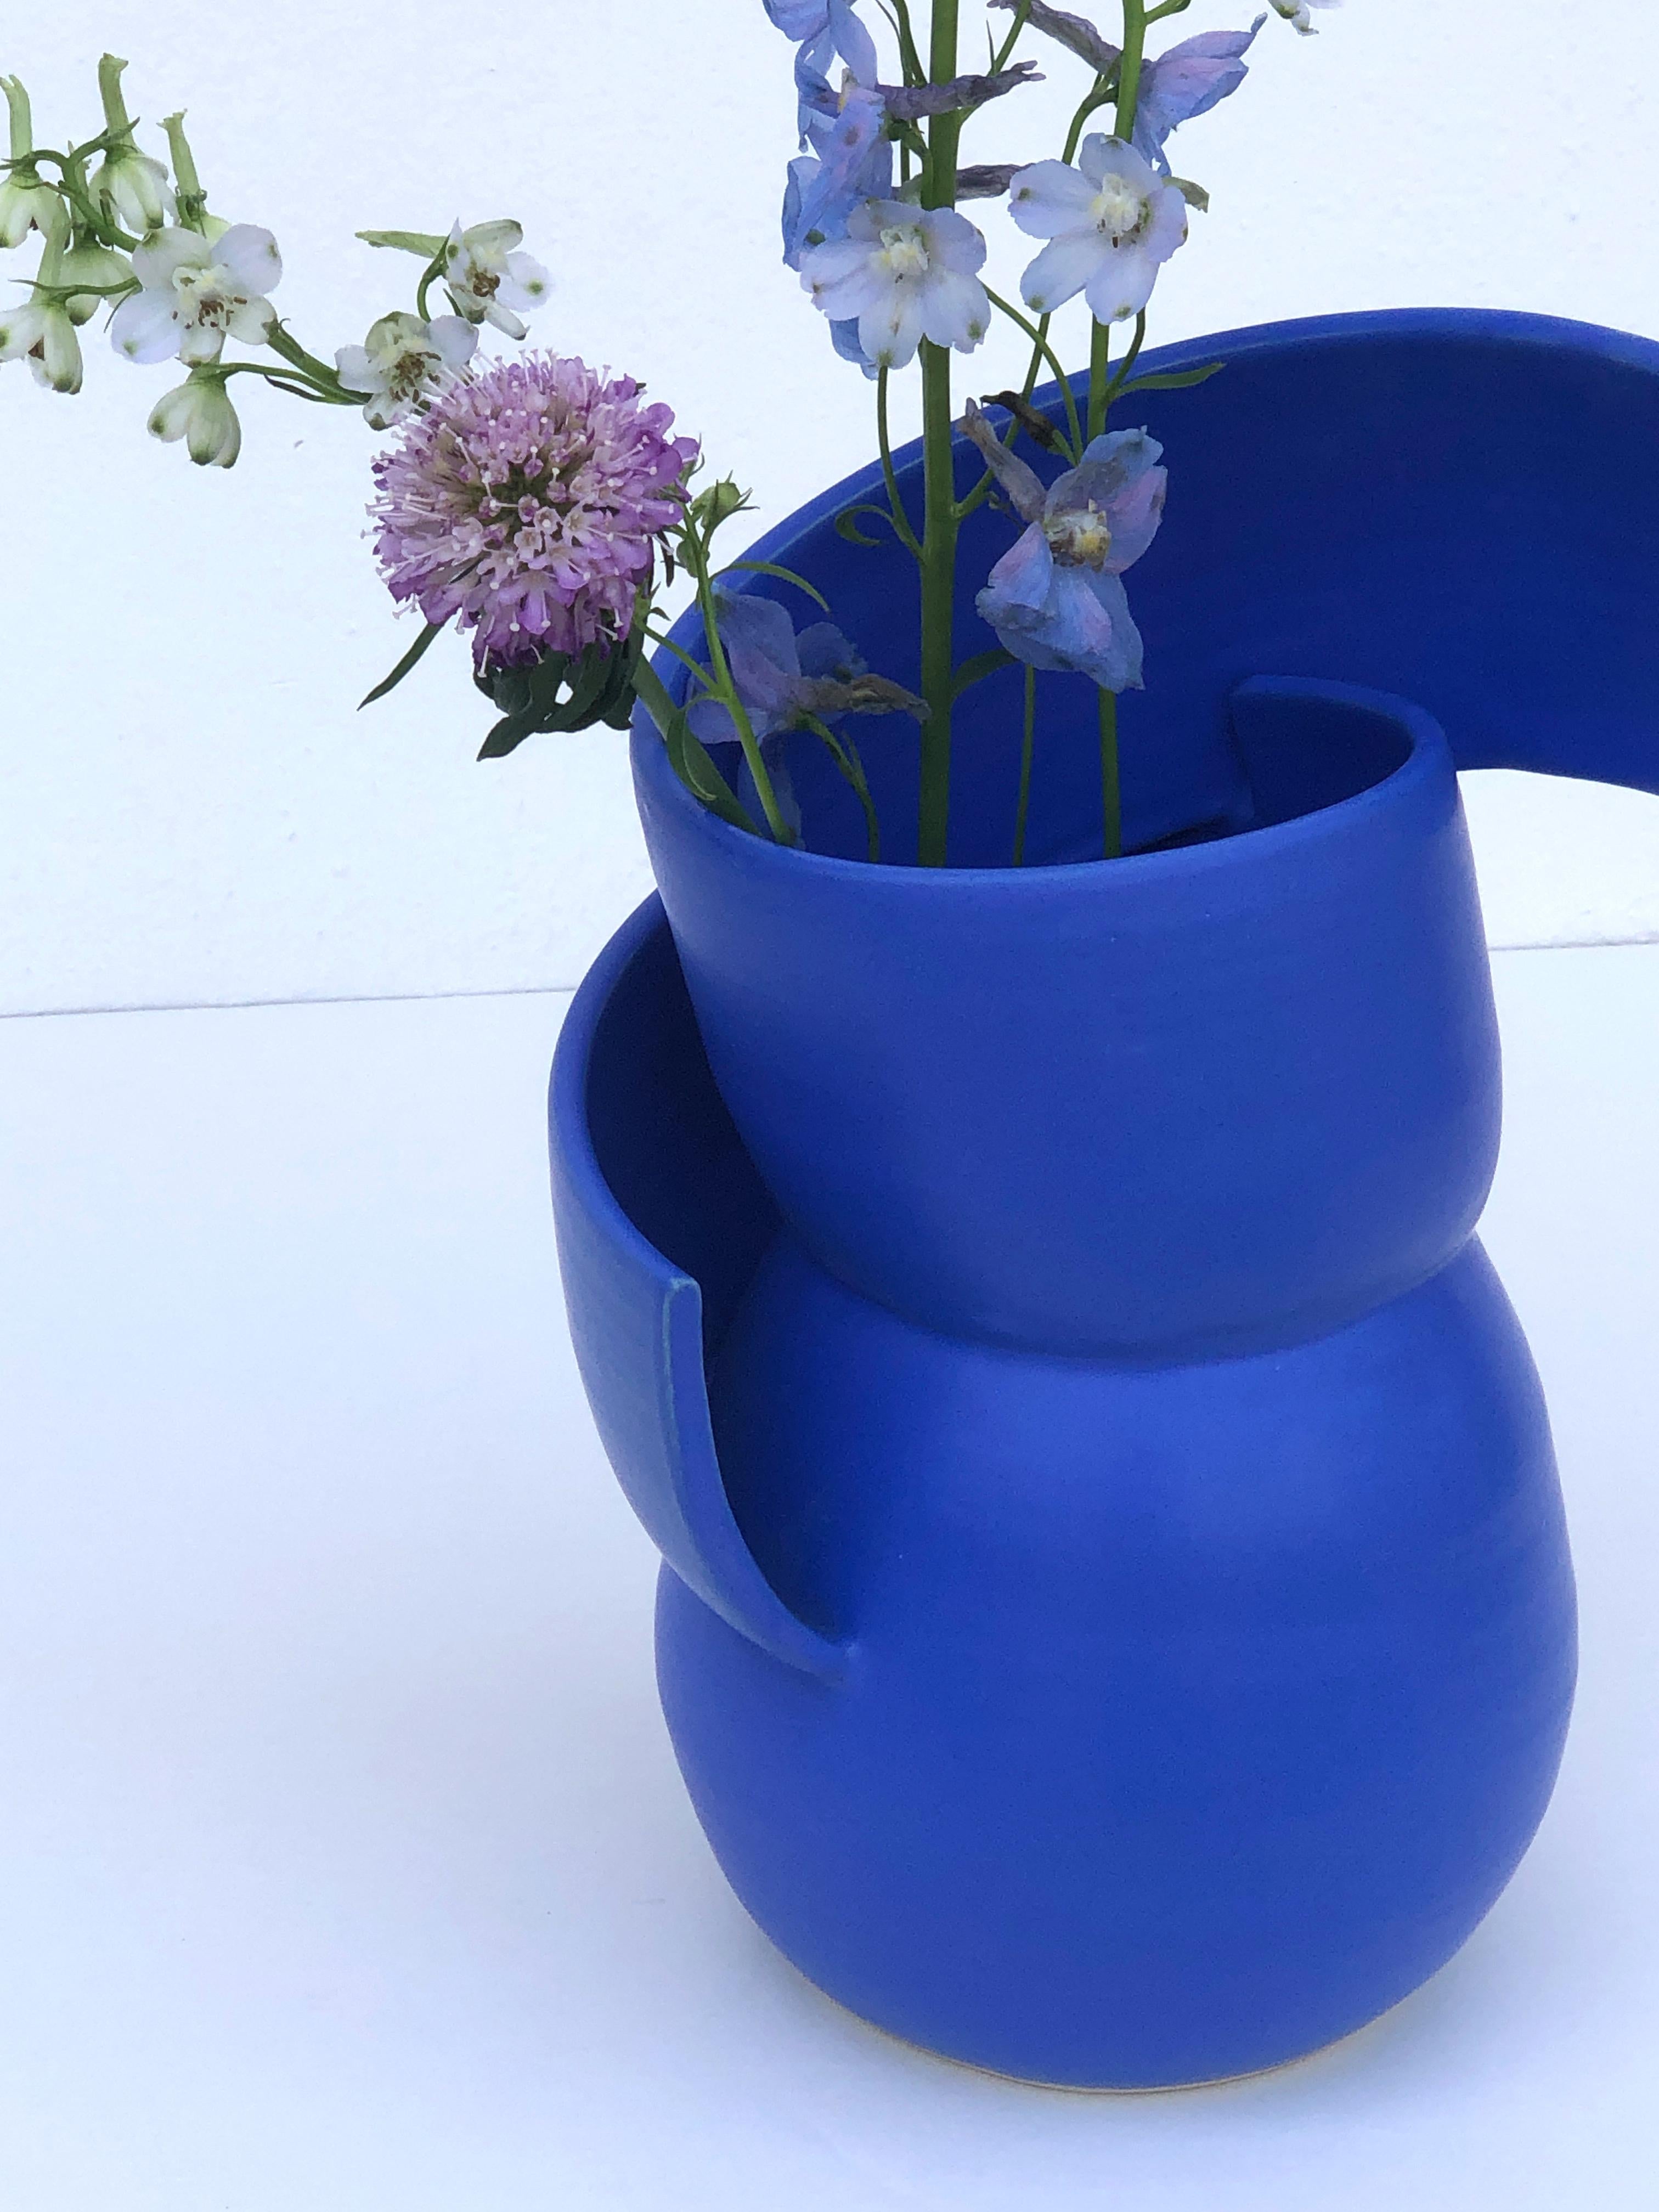 Spanish Electric Blue Helix Vase Handmade in Barcelona by Niho Ceramics For Sale